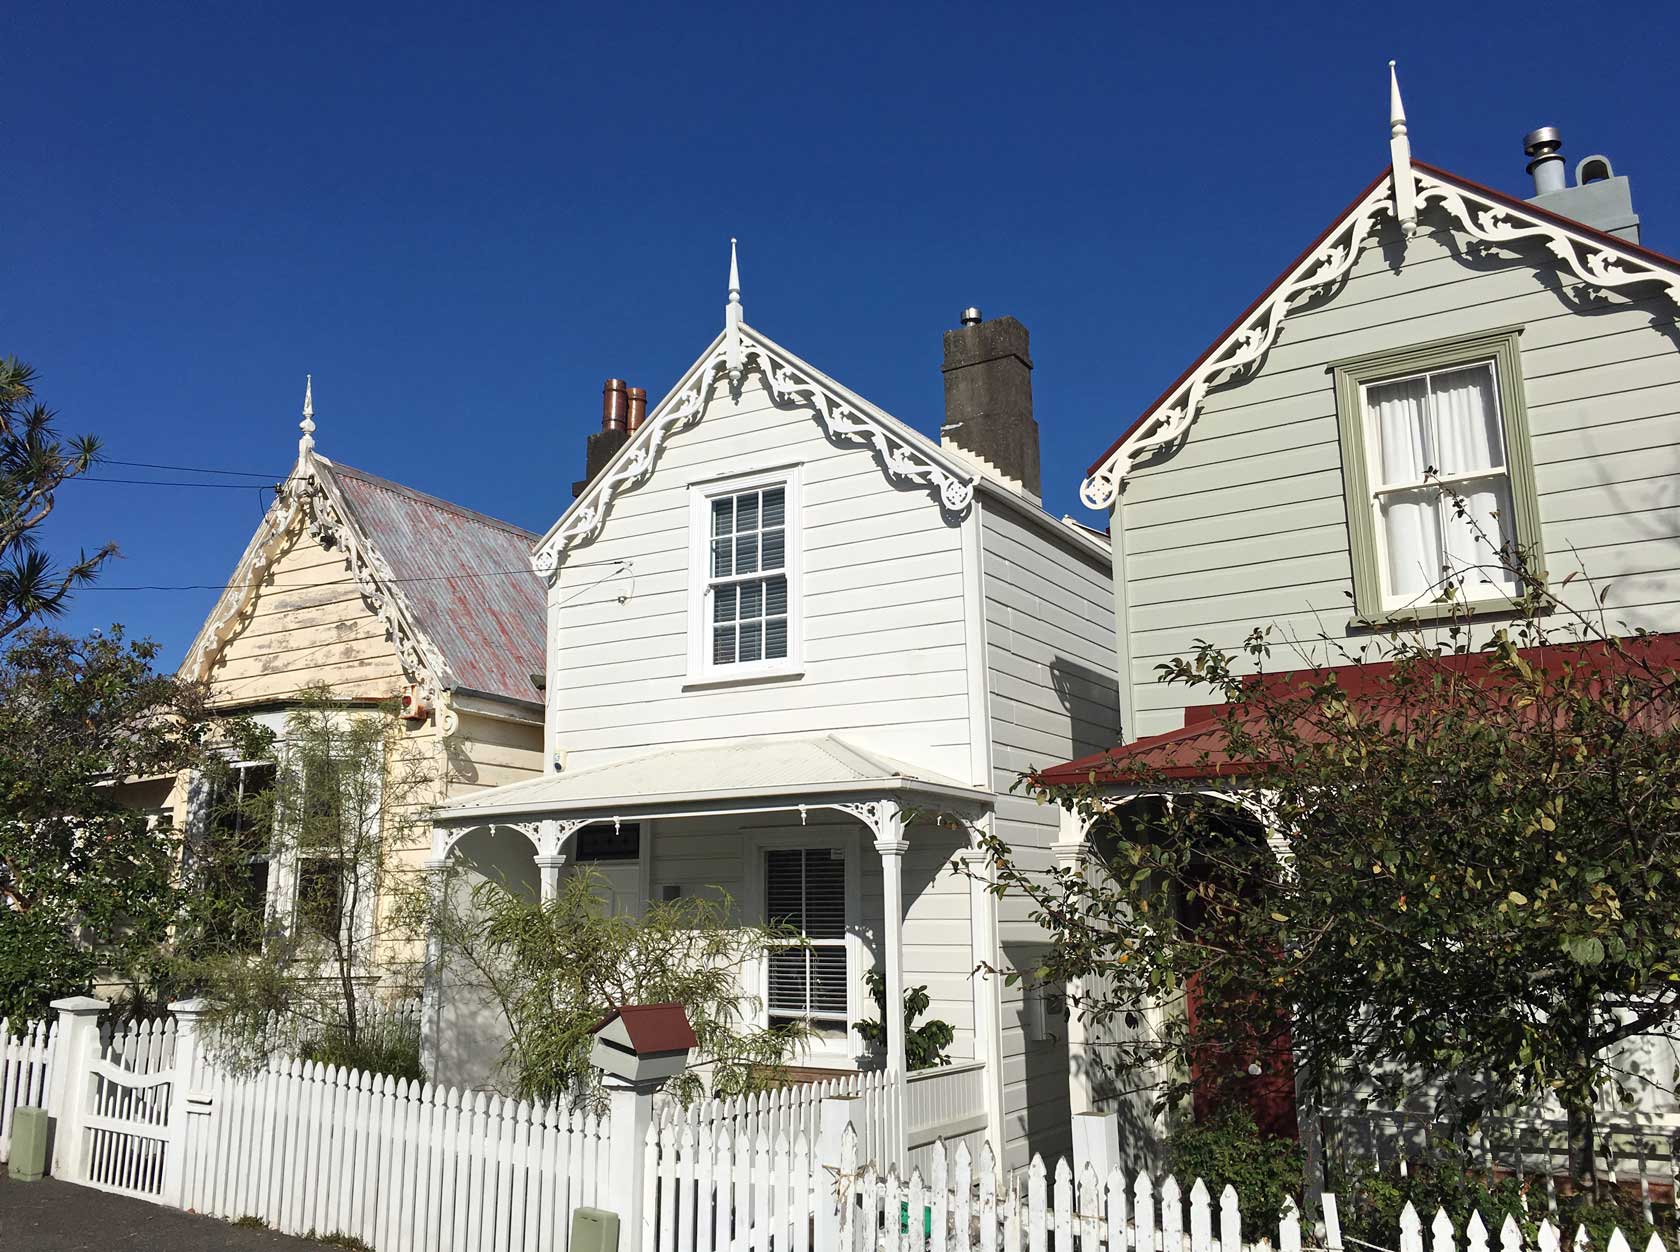 Victorian houses in Auckland New Zealand